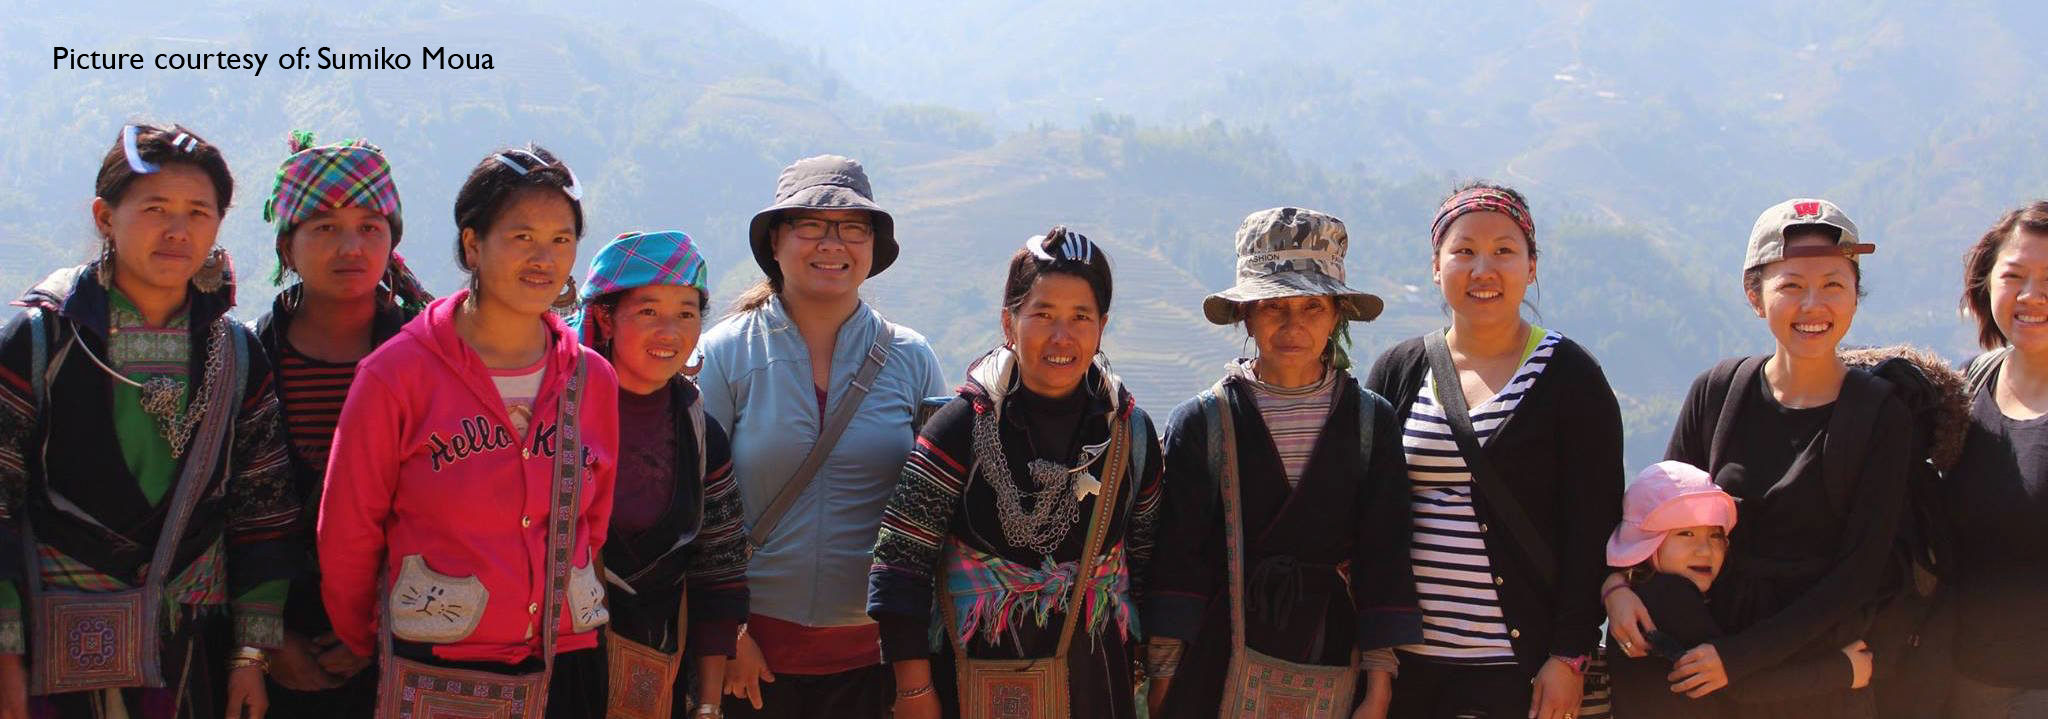 Mai Chao Duddeck, friends, and women of Vietnam pose for a group picture in front of the mountains.